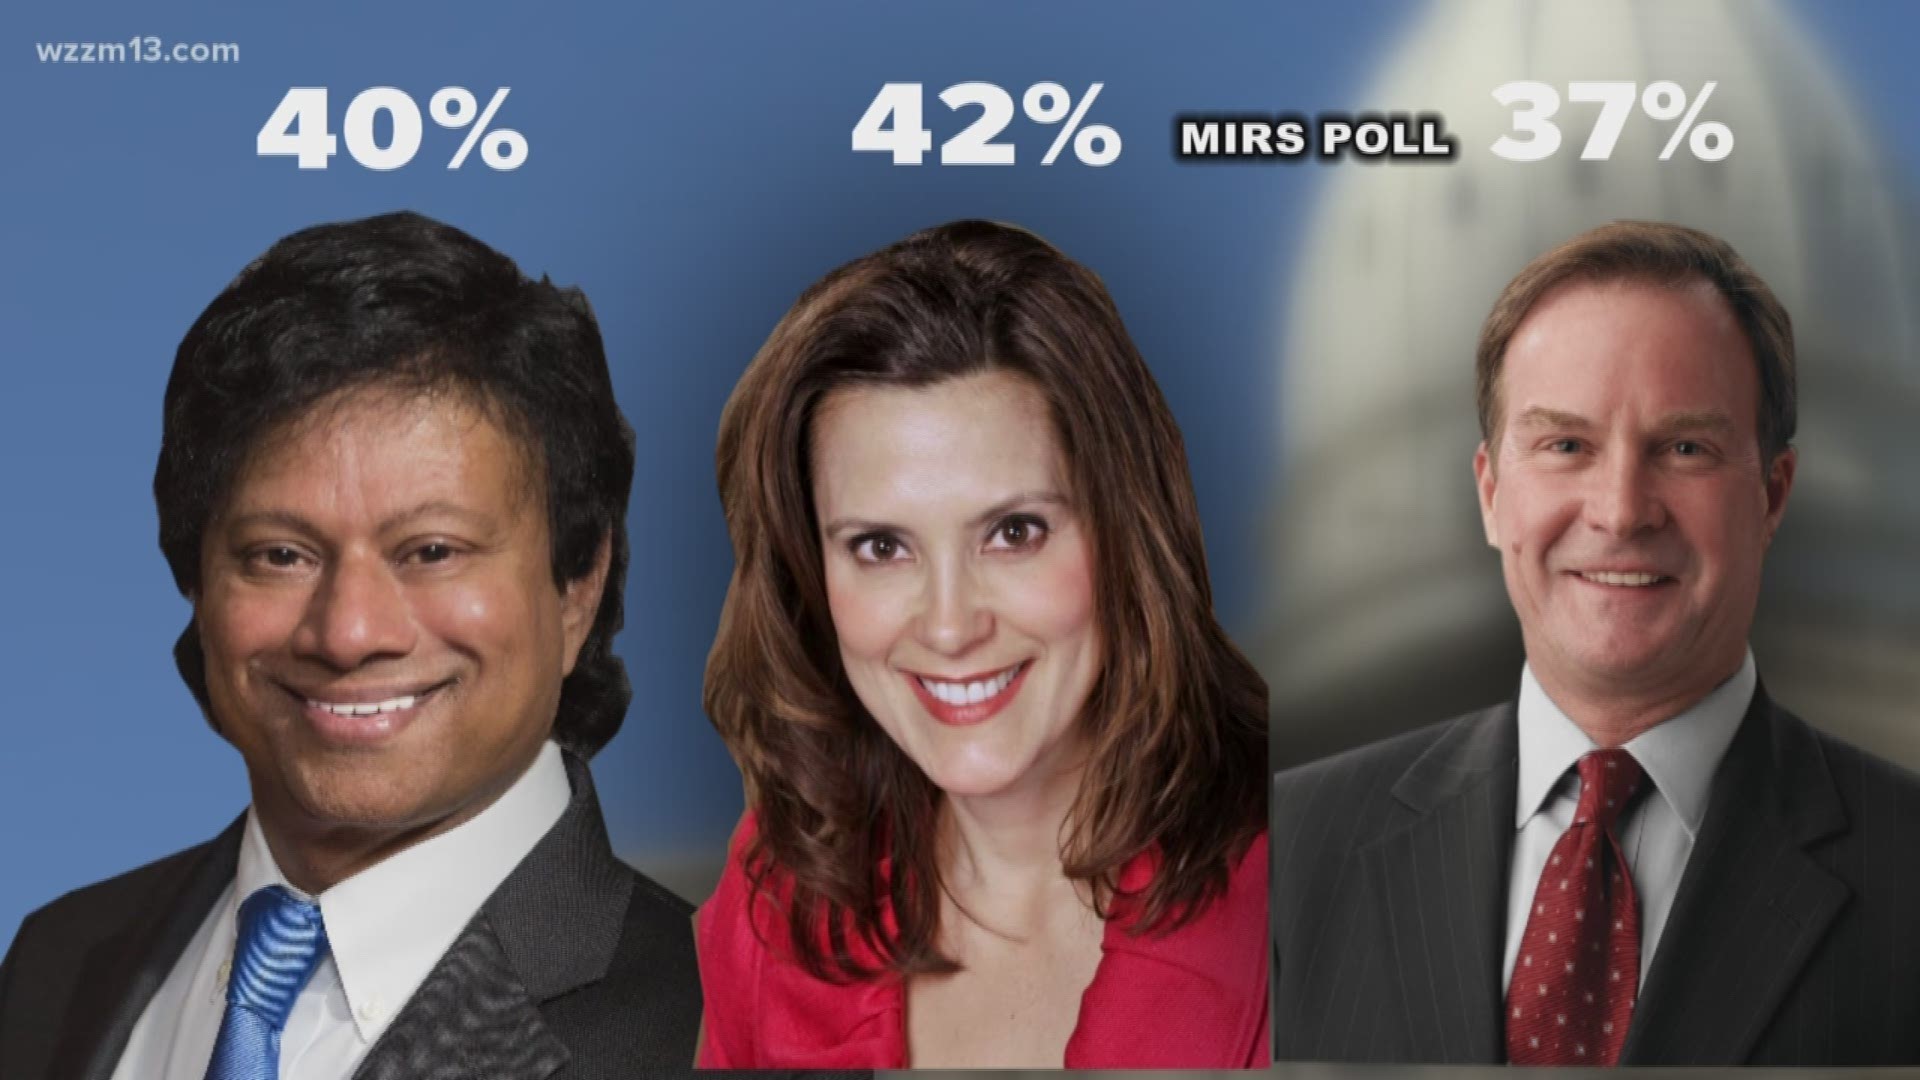 New poll shows Whitmer and Schuette lead in Gubernatorial races